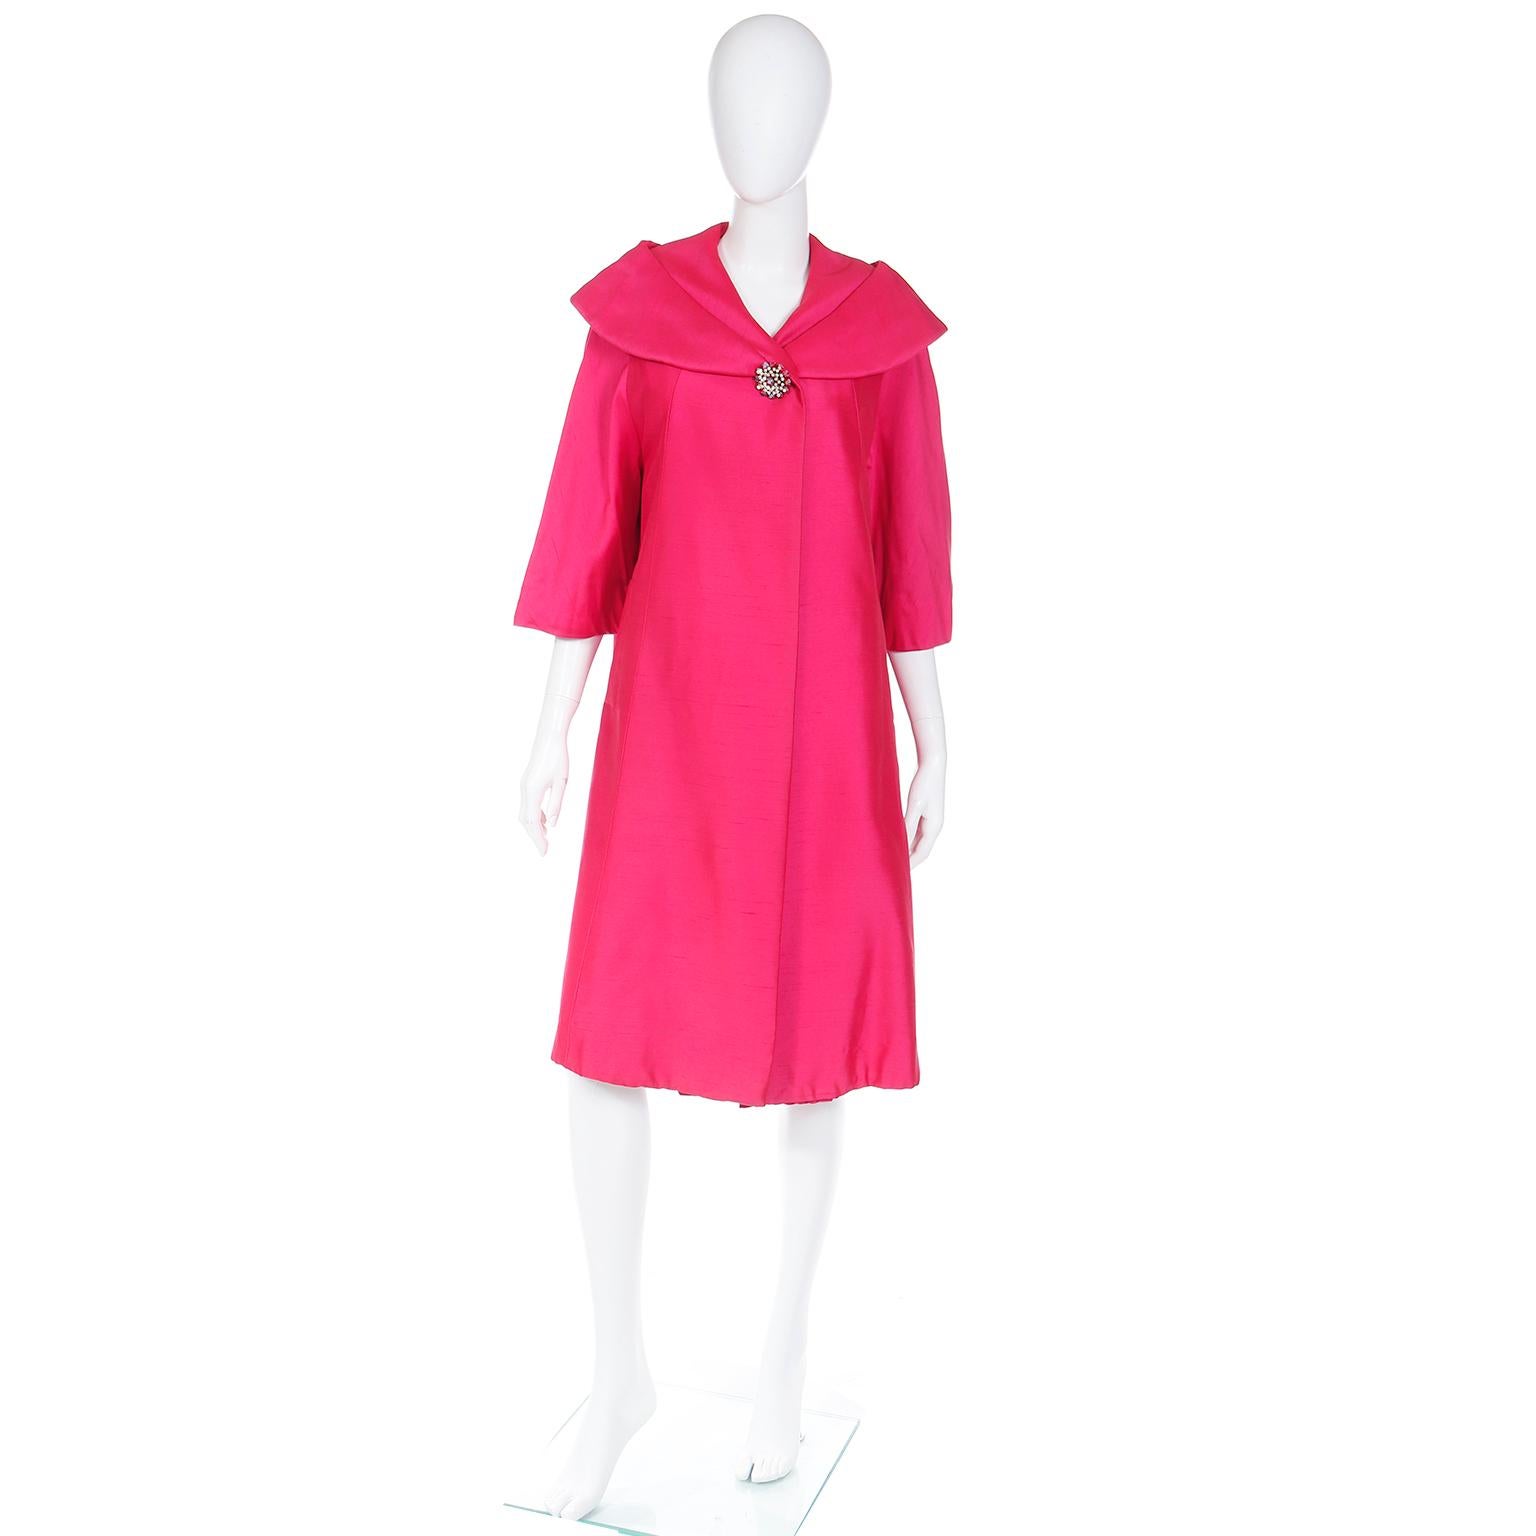 This is a gorgeous vintage 1950's pink evening coat purchased at Bullock's in Westwood at the Weyburn room in the late 1950's. The coat has 3/4 length sleeves, a pleated collar, a giant rhinestone button, side slit pockets, and is fully lined. This